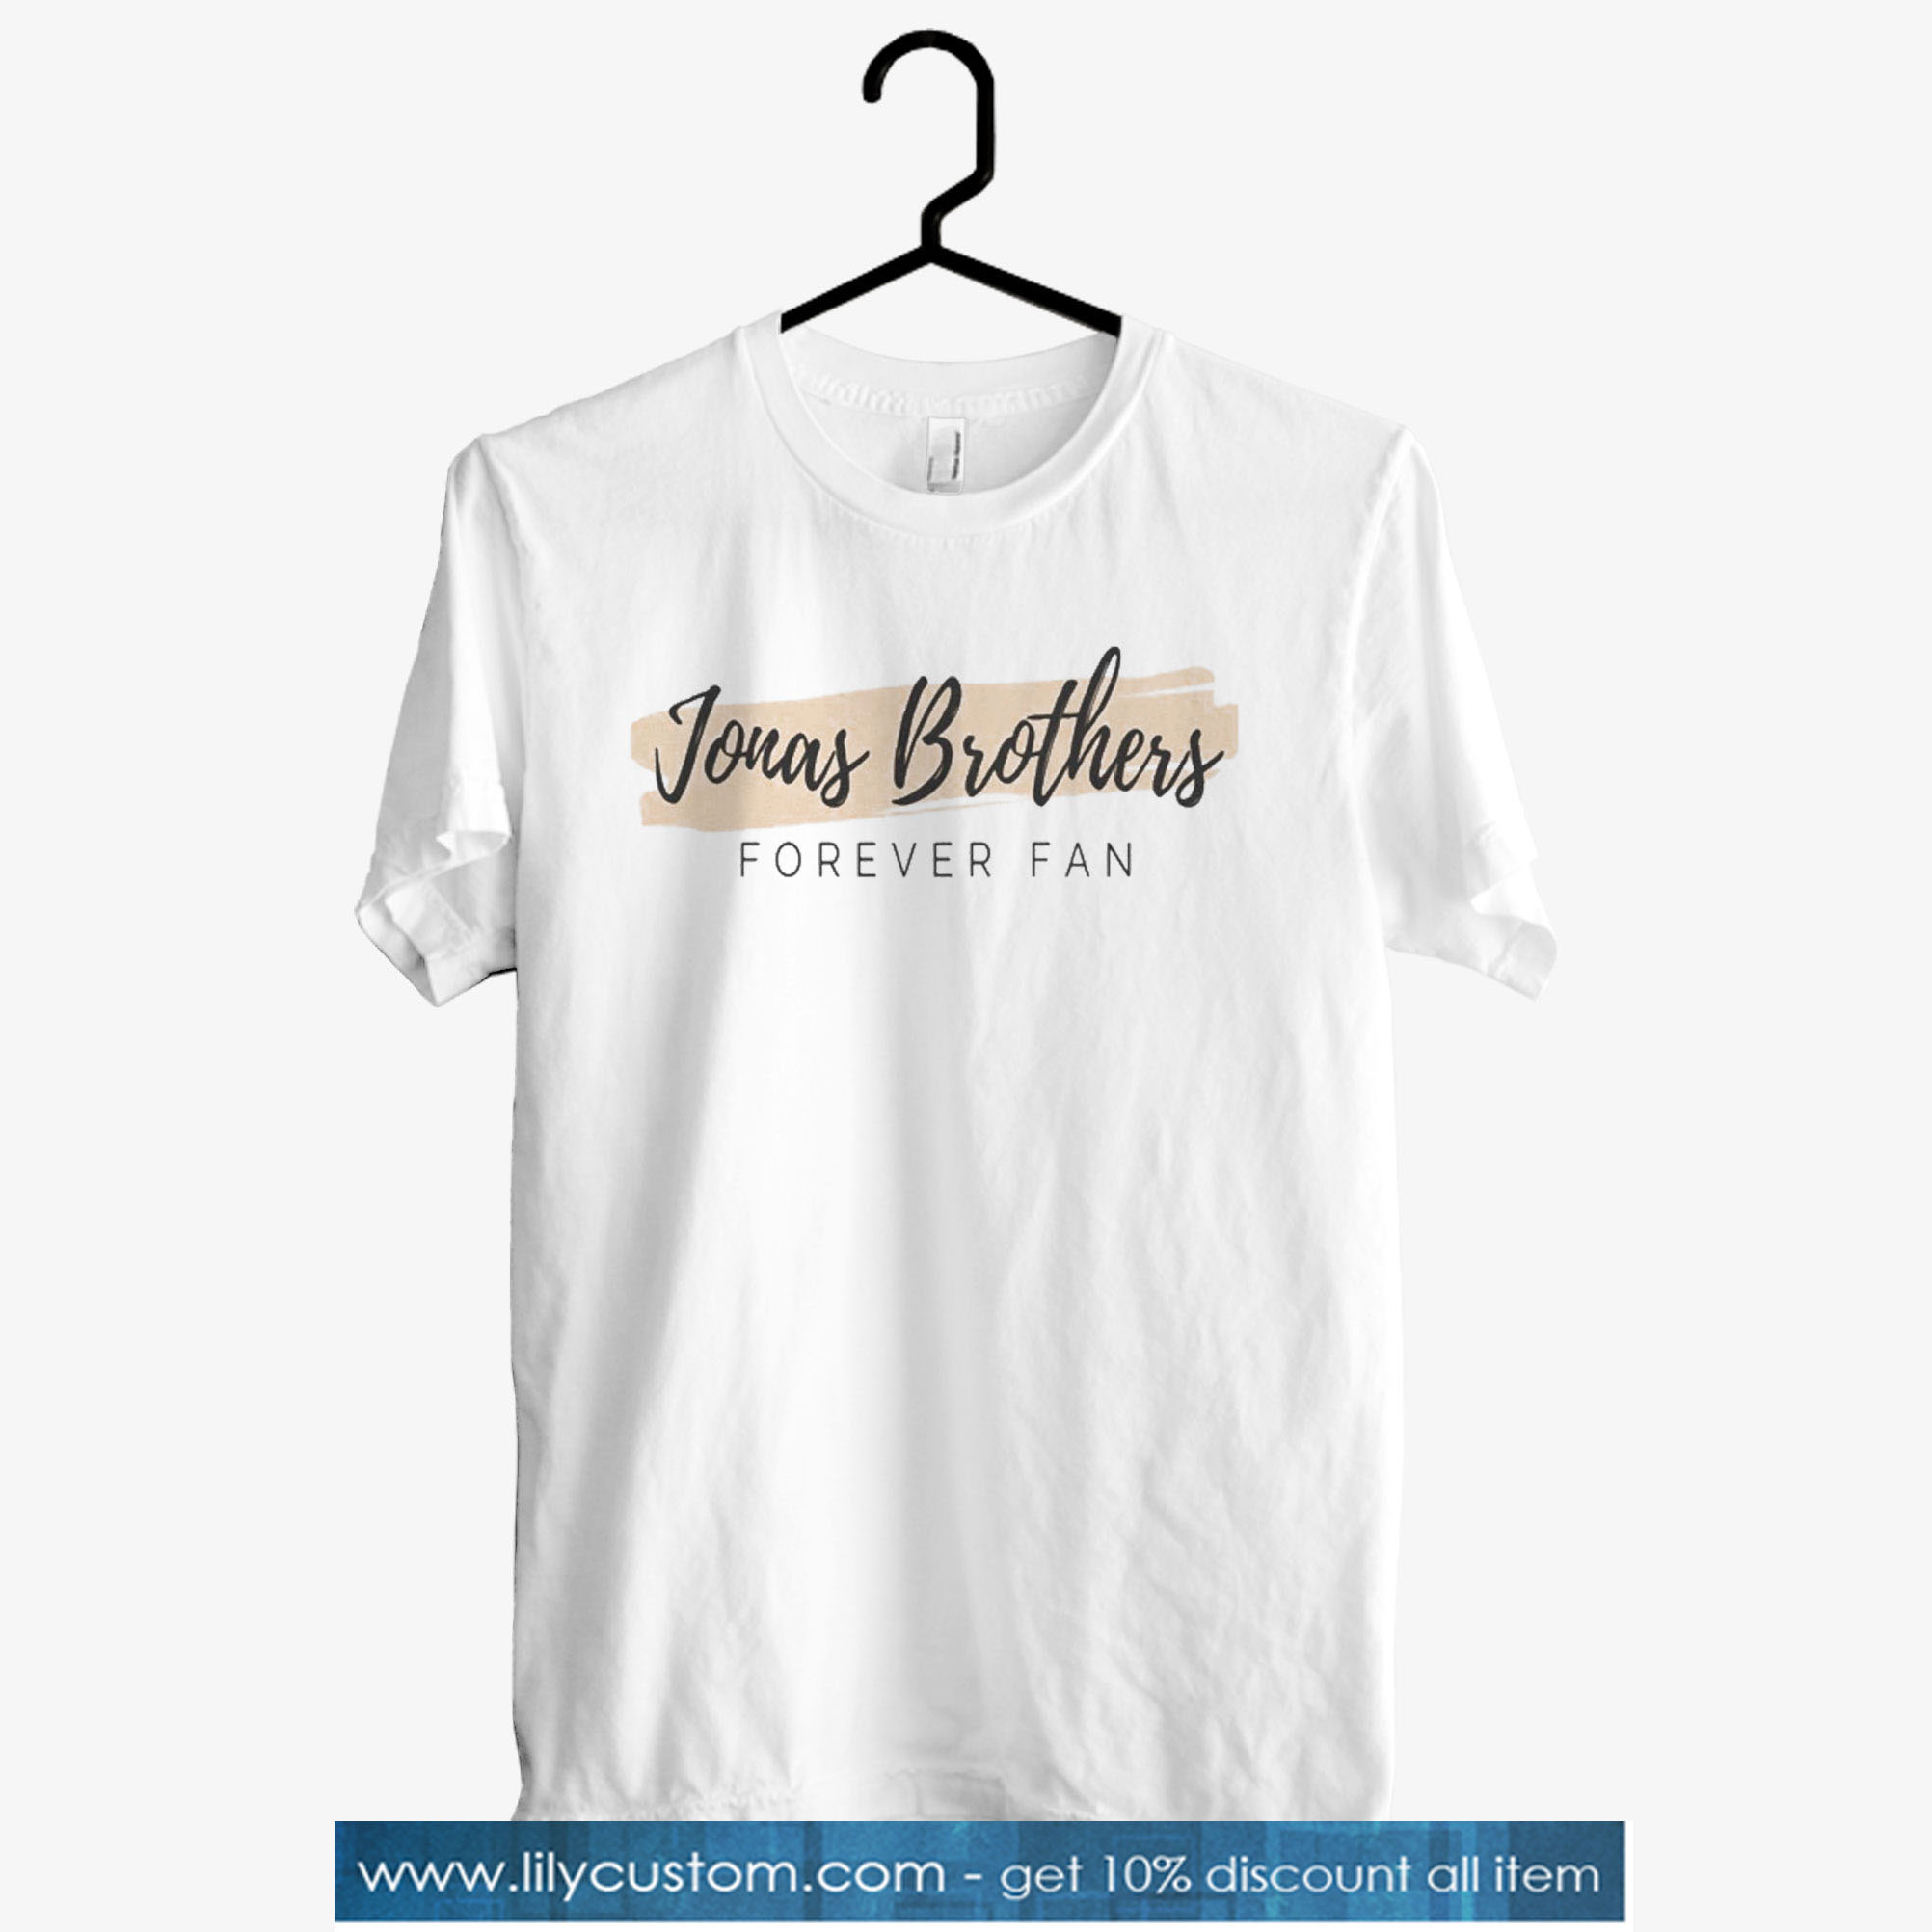 Jonas Brothers Forever Fan T shirt SN